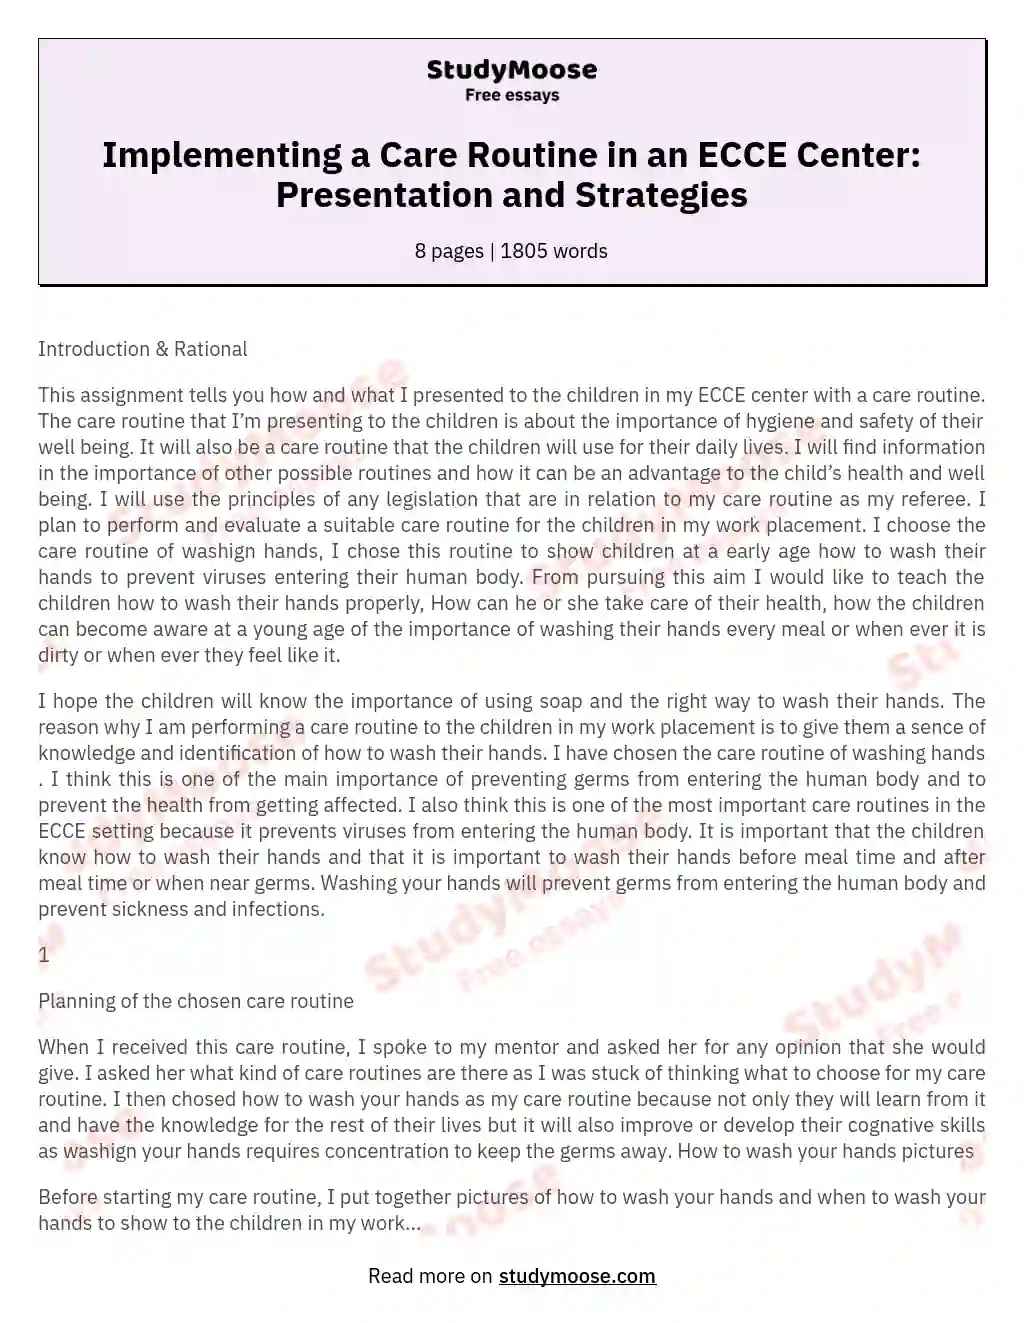 Implementing a Care Routine in an ECCE Center: Presentation and Strategies essay